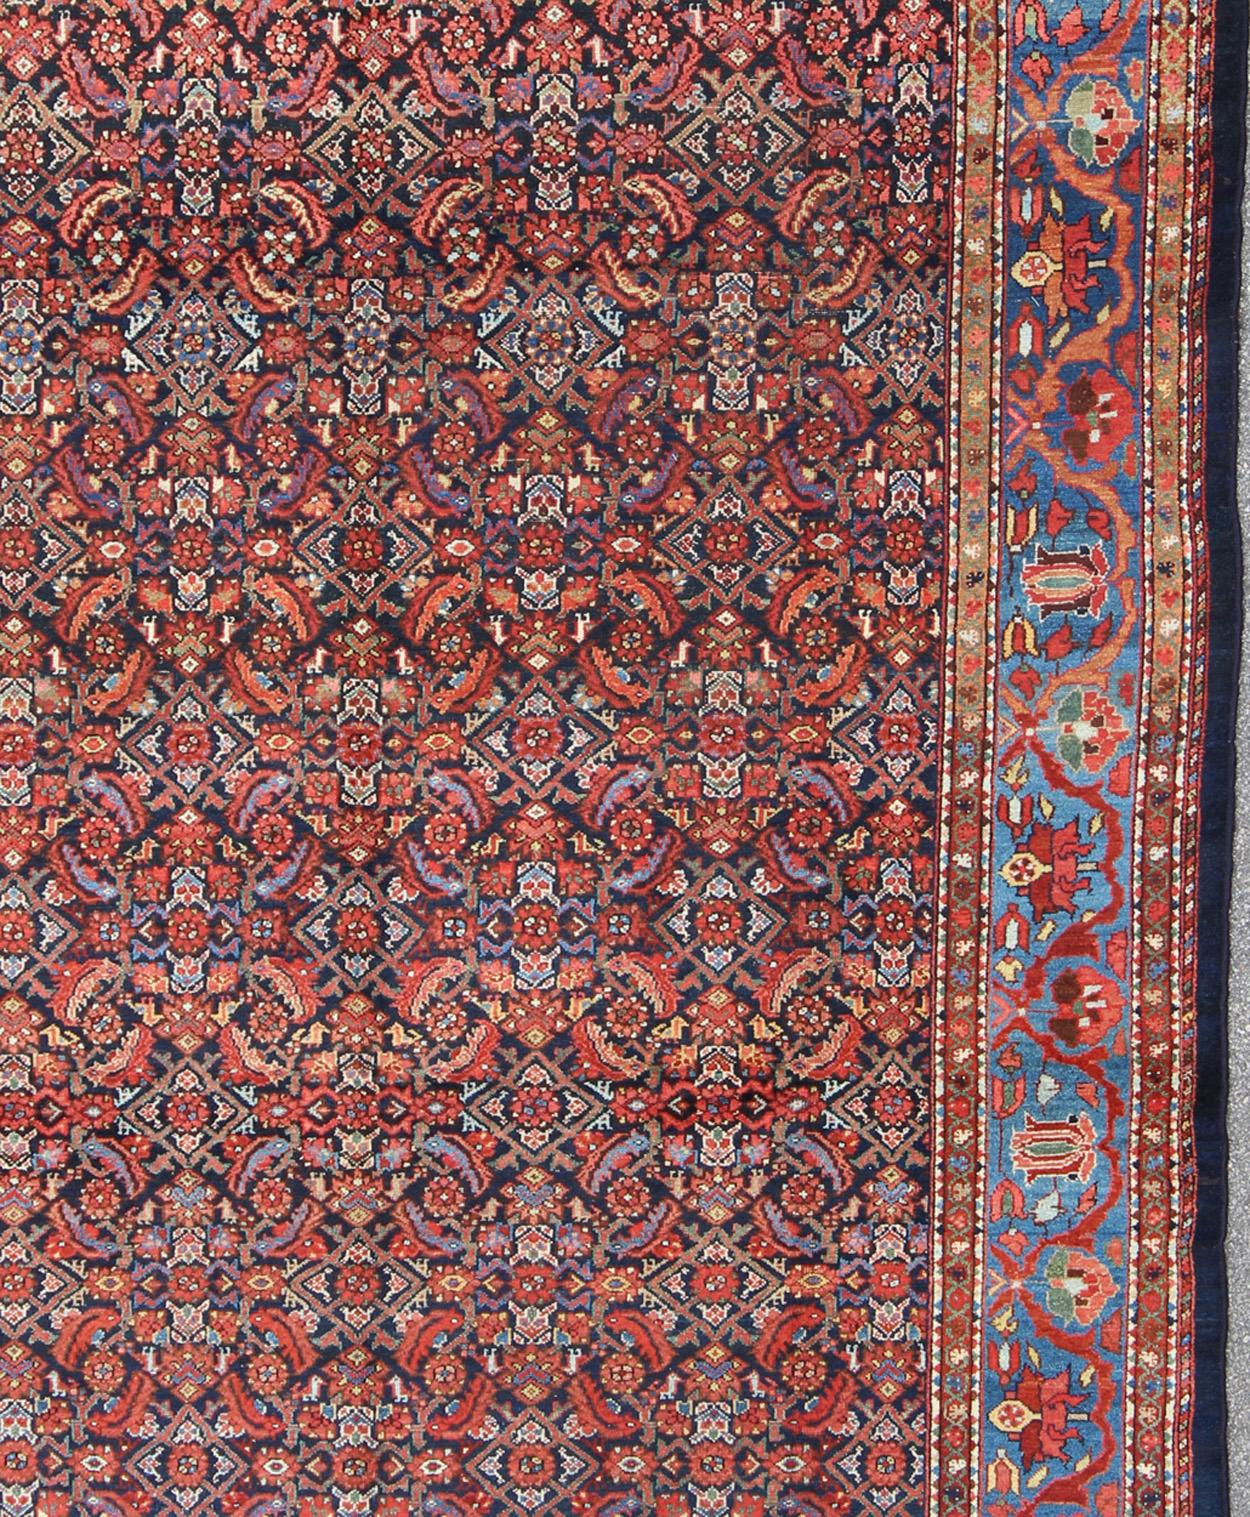 Antique Persian Malayer Rug, Country of Origin: Iran; Type: Malayer;  Design: All-Over, Herati; Keivan Woven Arts: rug F-0909;  Antique Malayer in Black Background and Cobalt blue border. 

Measures: 8'8 x 11'8

This magnificent antique Persian